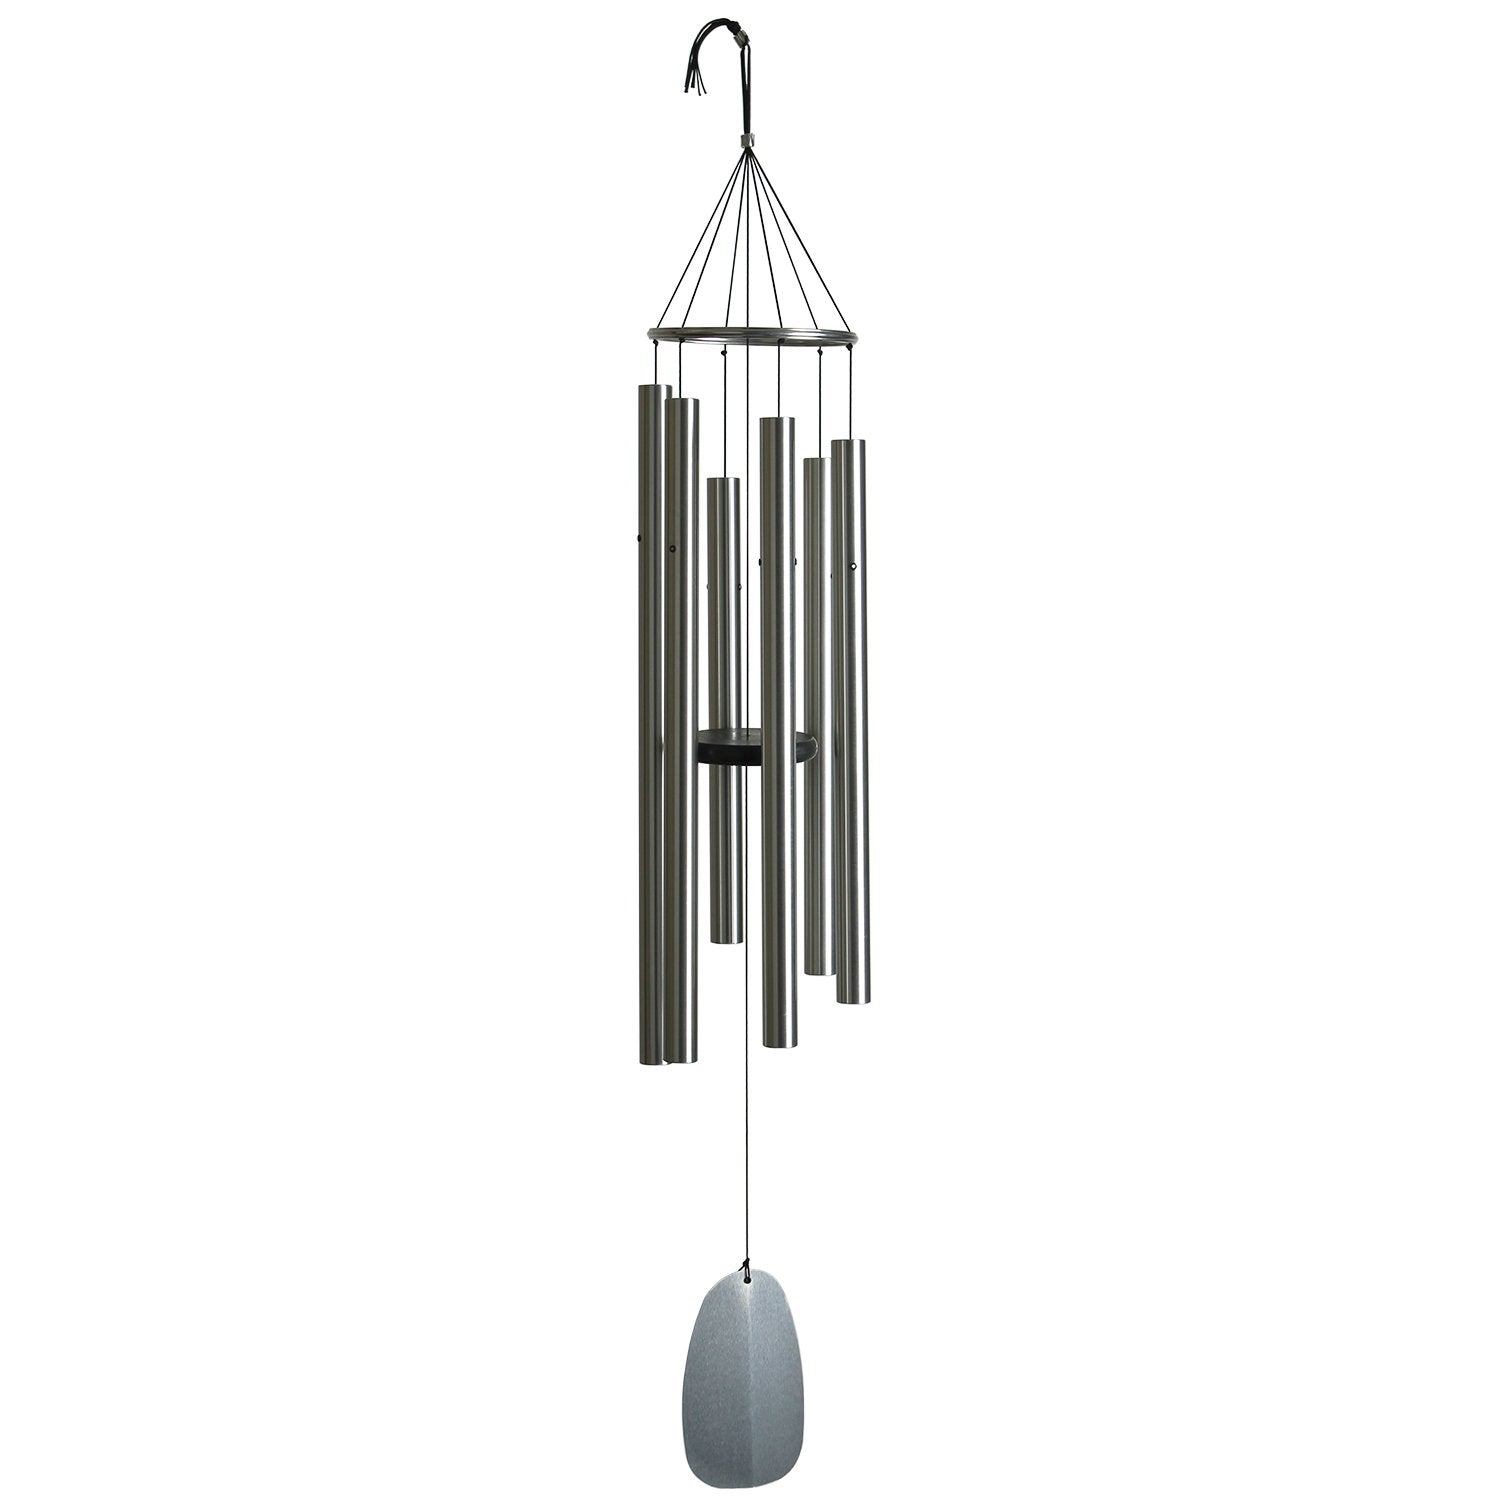 Bells of Paradise - Silver, 54-Inch full product image